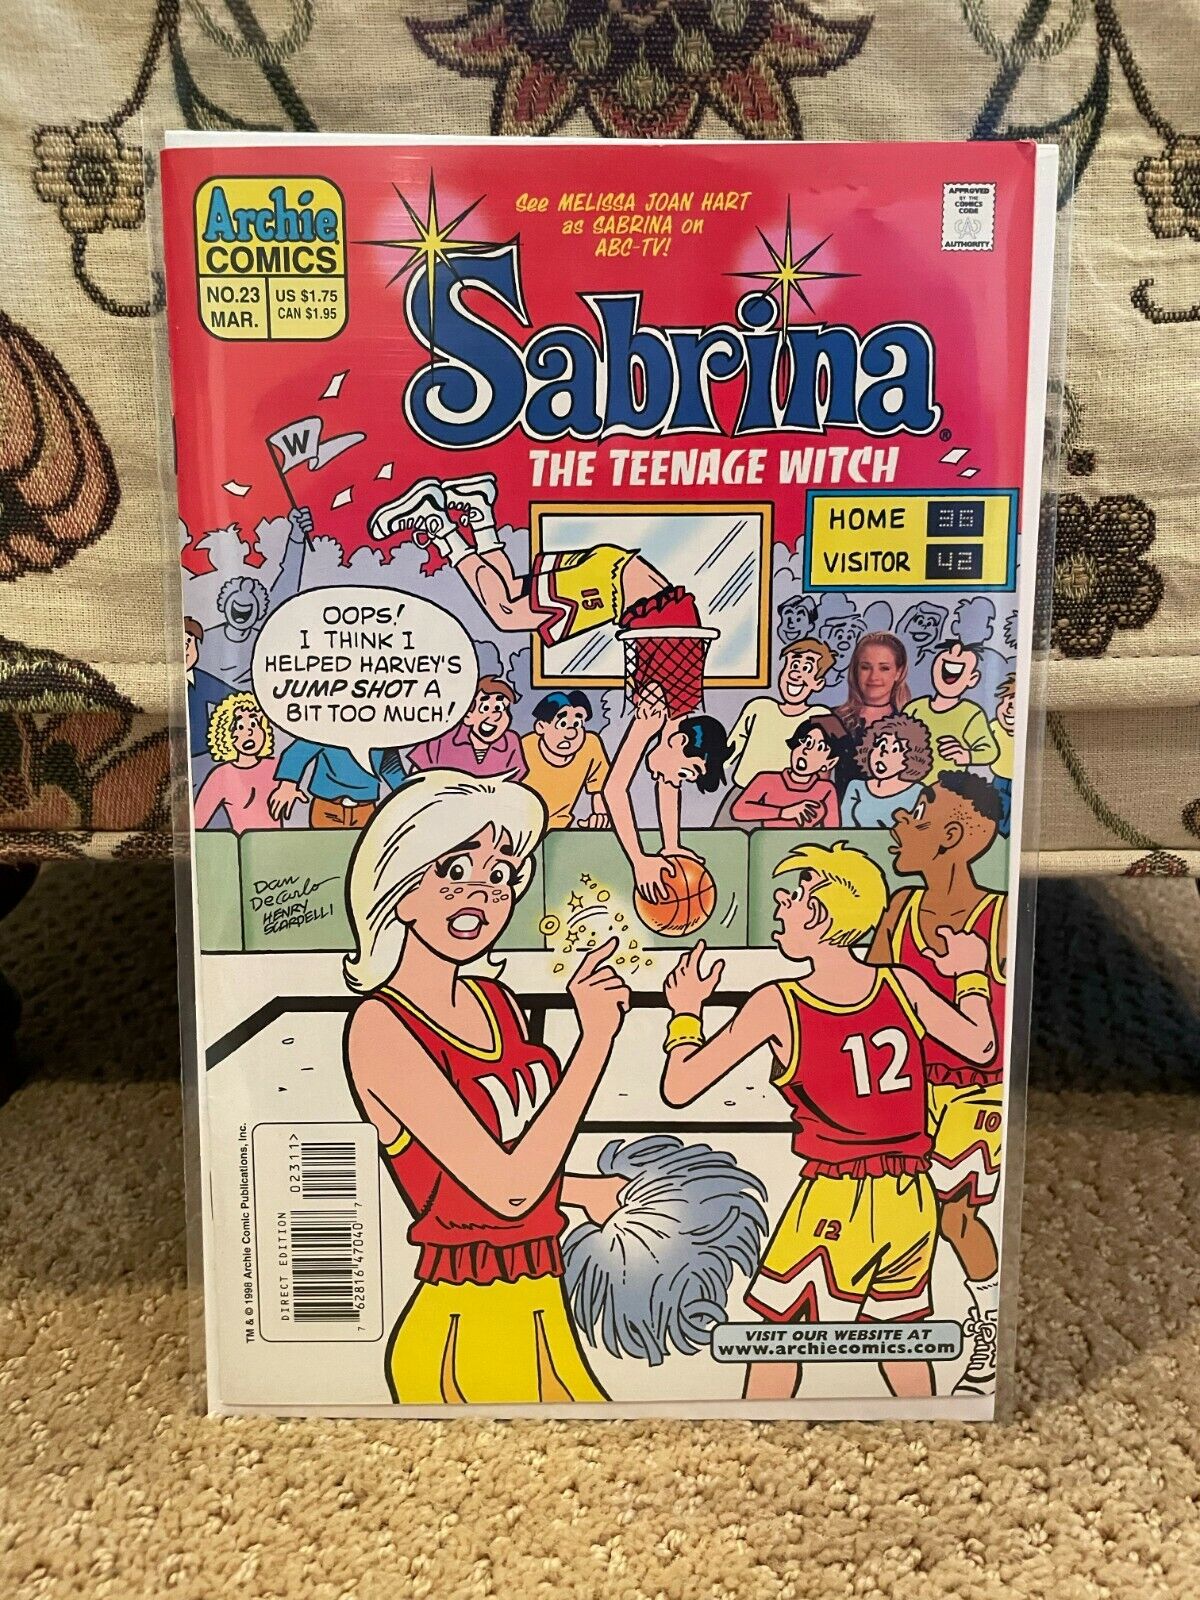 SABRINA THE TEENAGE WITCH #23 (ARCHIE 1998) VF/NM COMBO SHIPPING! bag/board